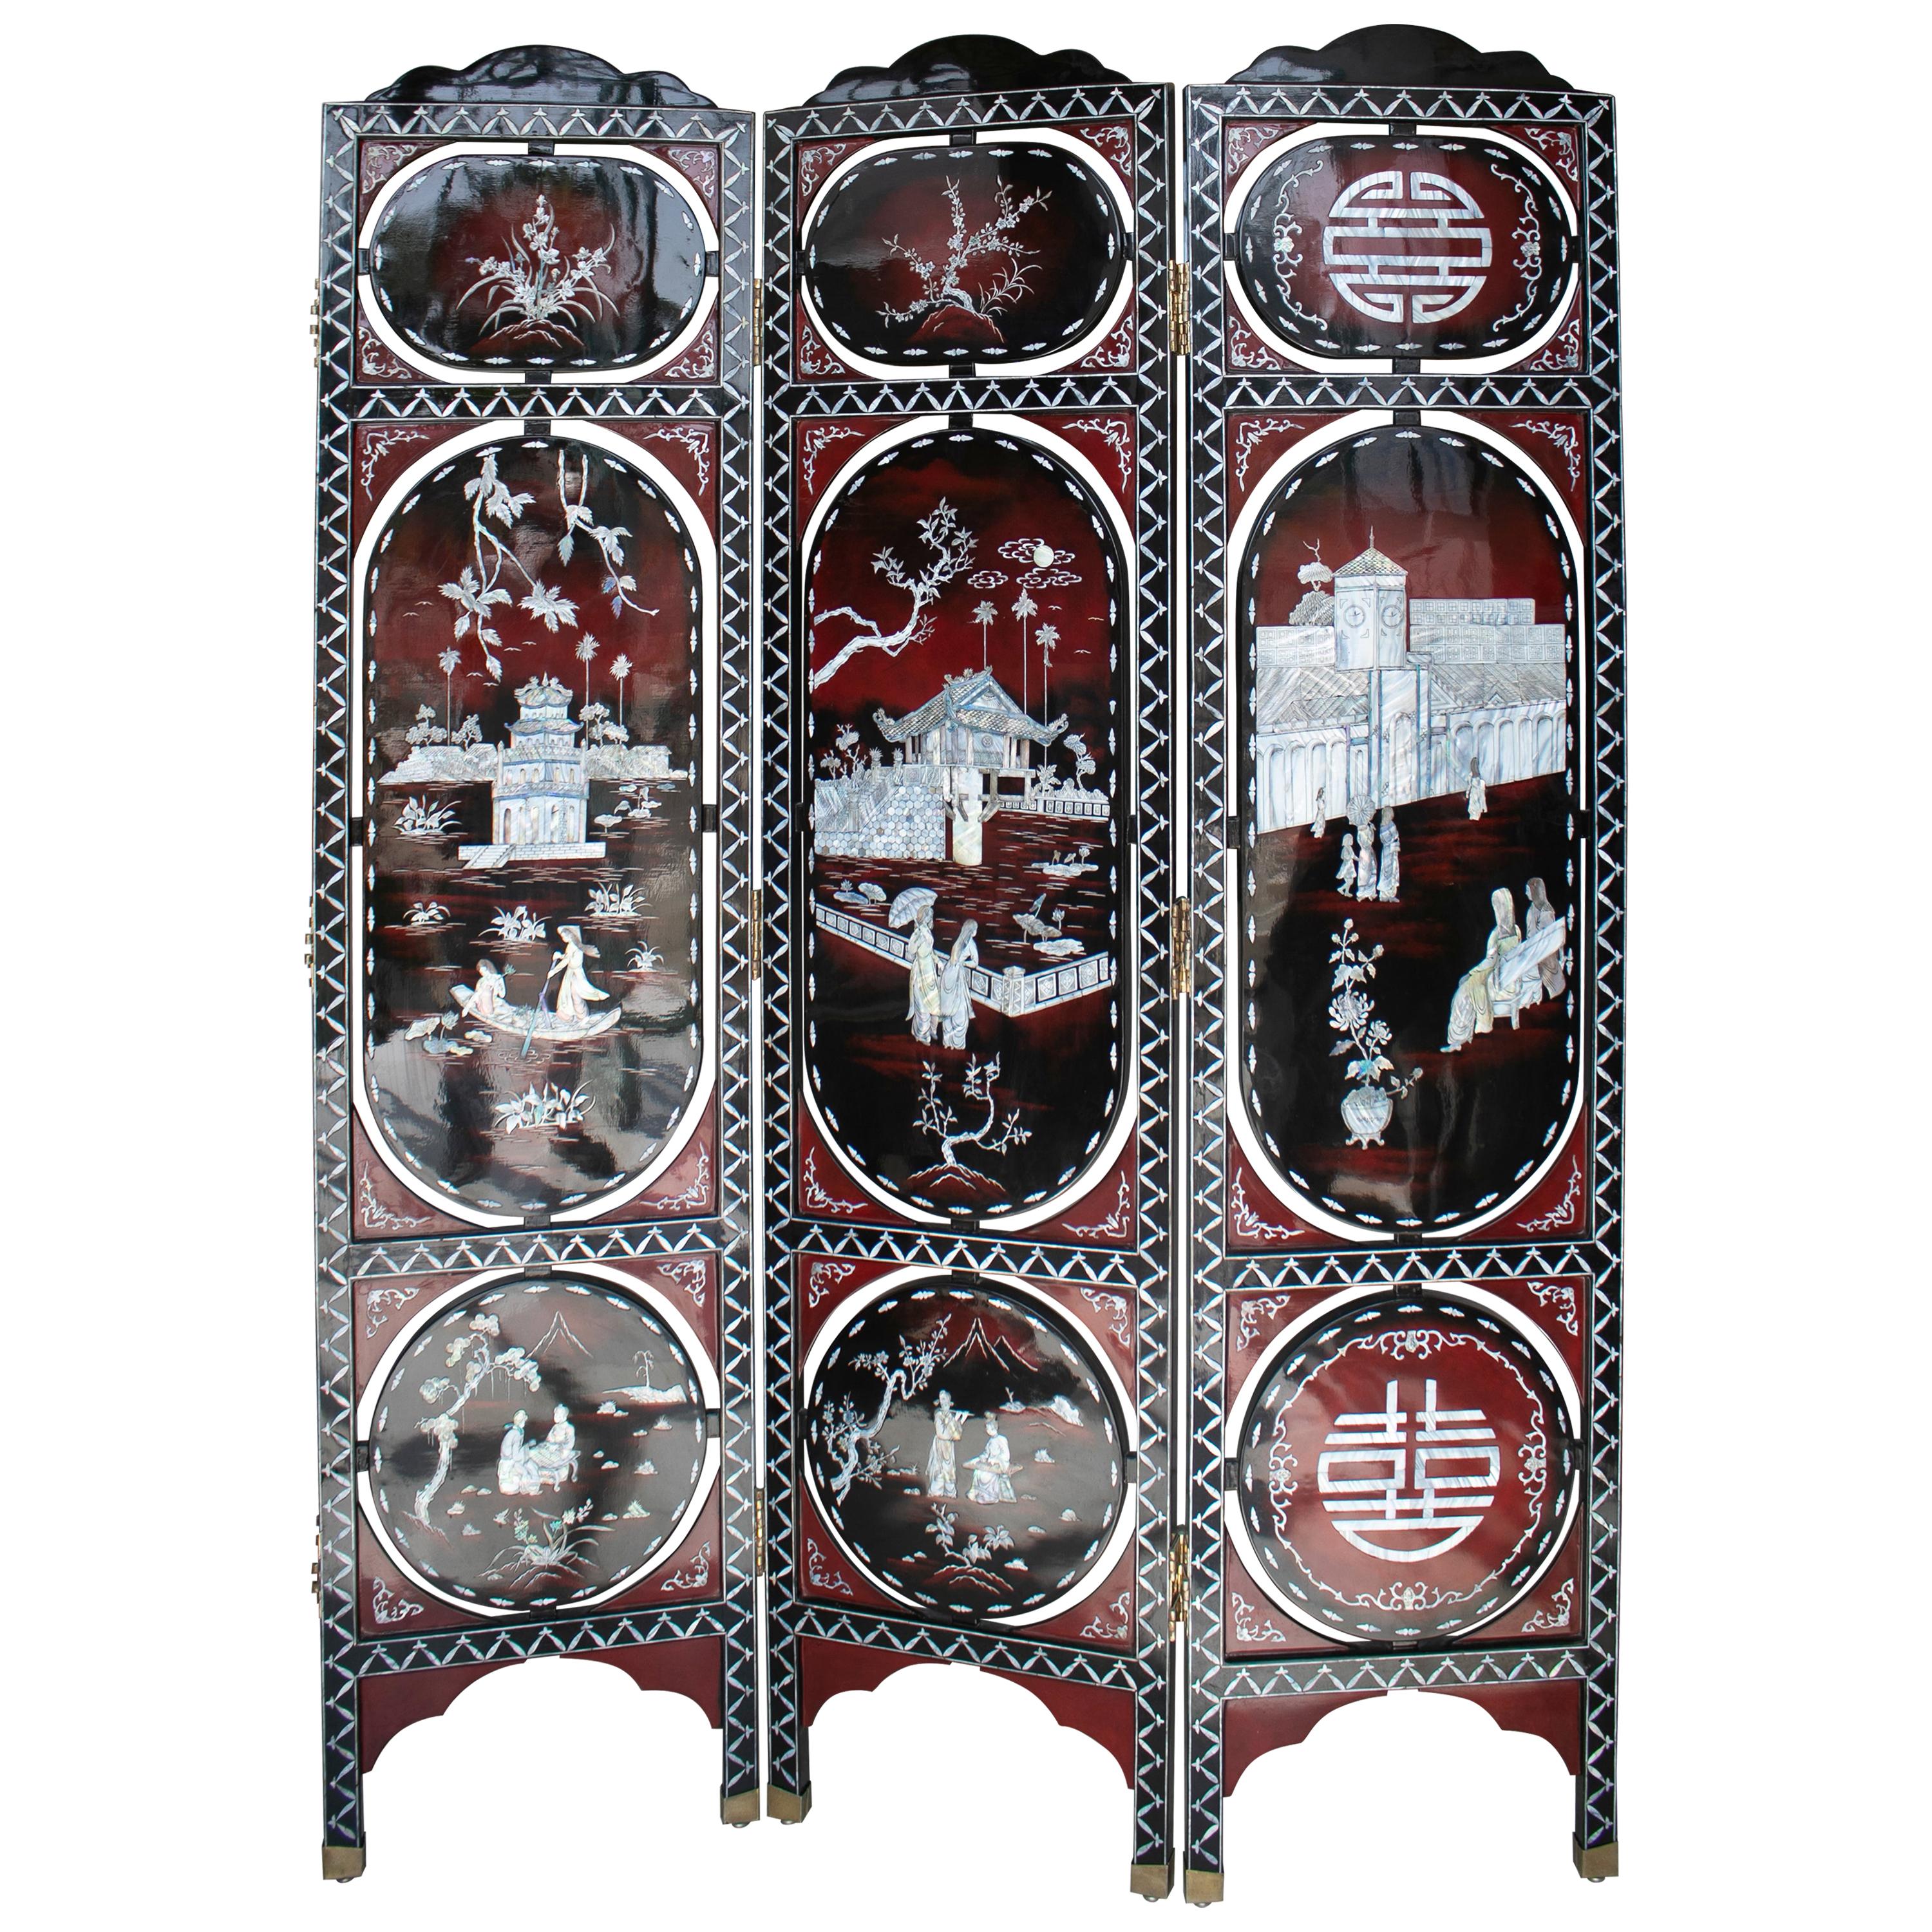 1970s Chinese Lacquered Folding Screen with Nacre Inlay Asian Motifs